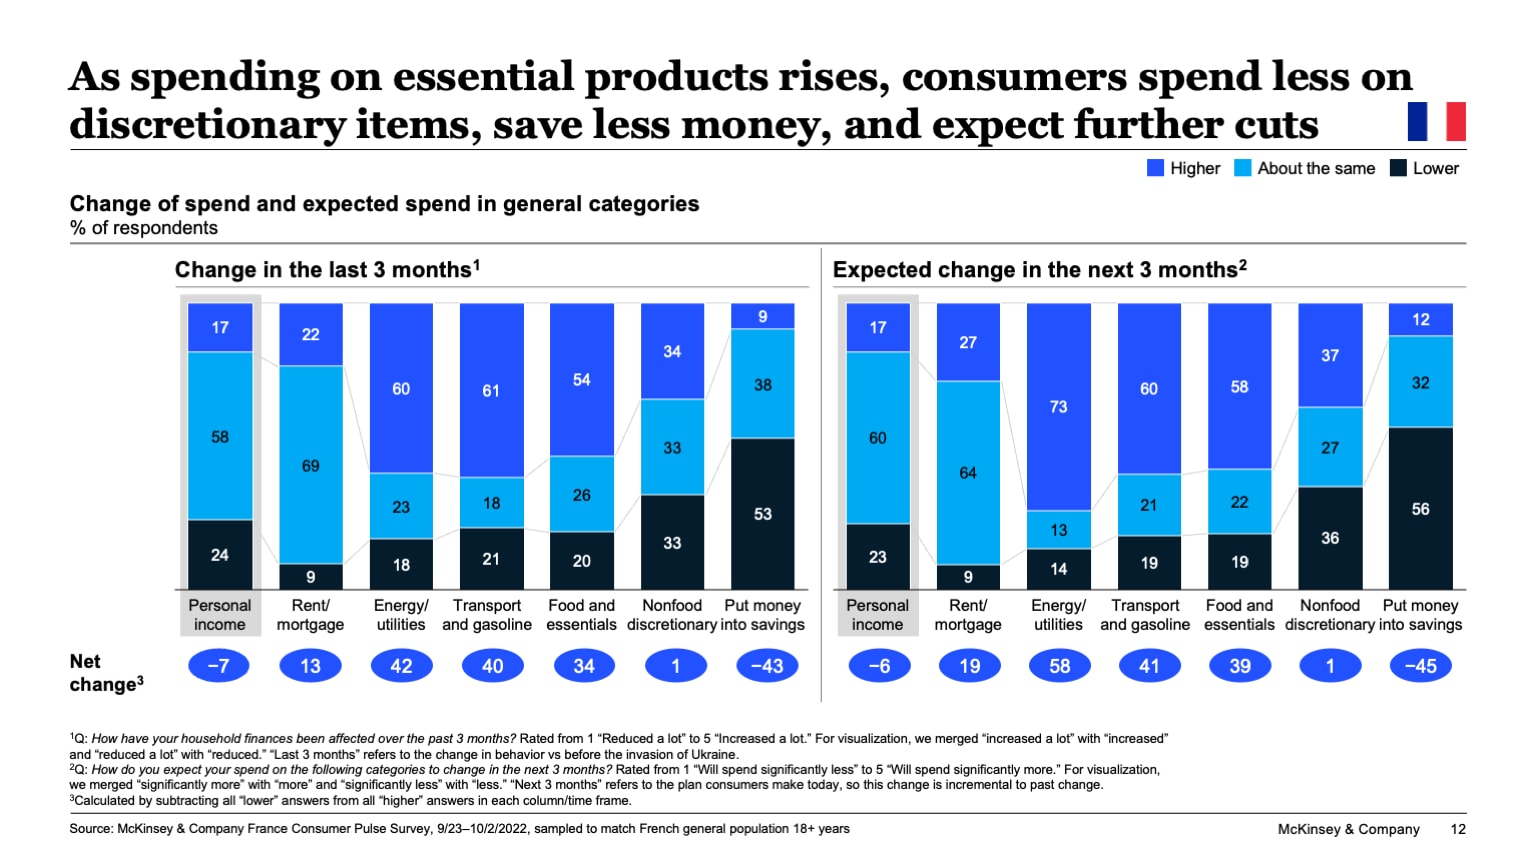 As spending on essential products rises, consumers spend less on discretionary items, save less money, and expect further cuts